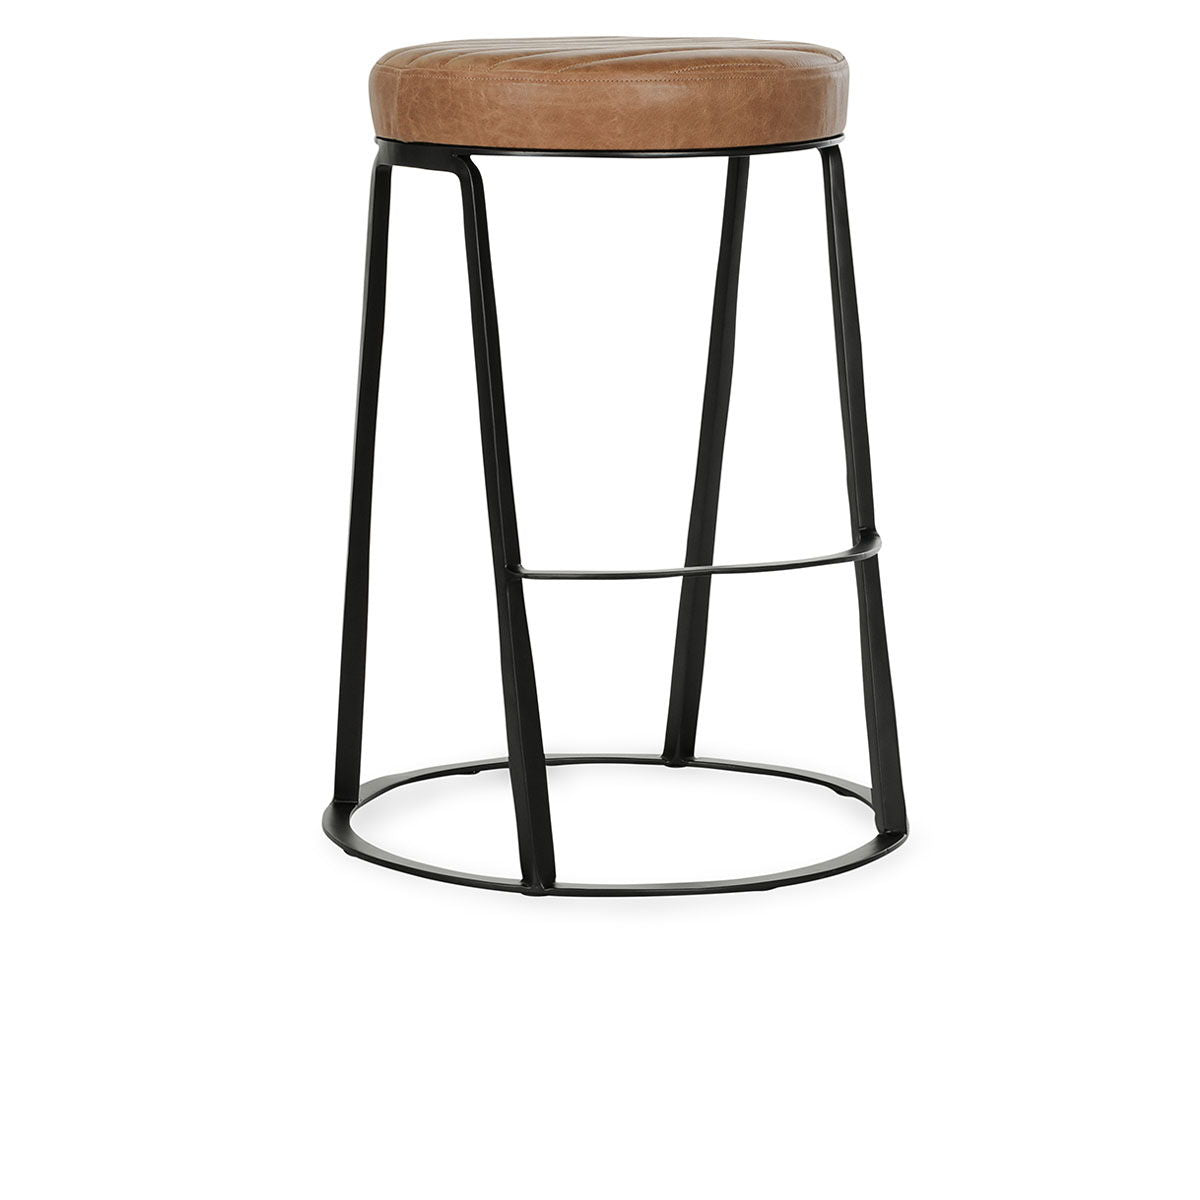 Sawyer - Leather Counter Stool - Chestnut Brown